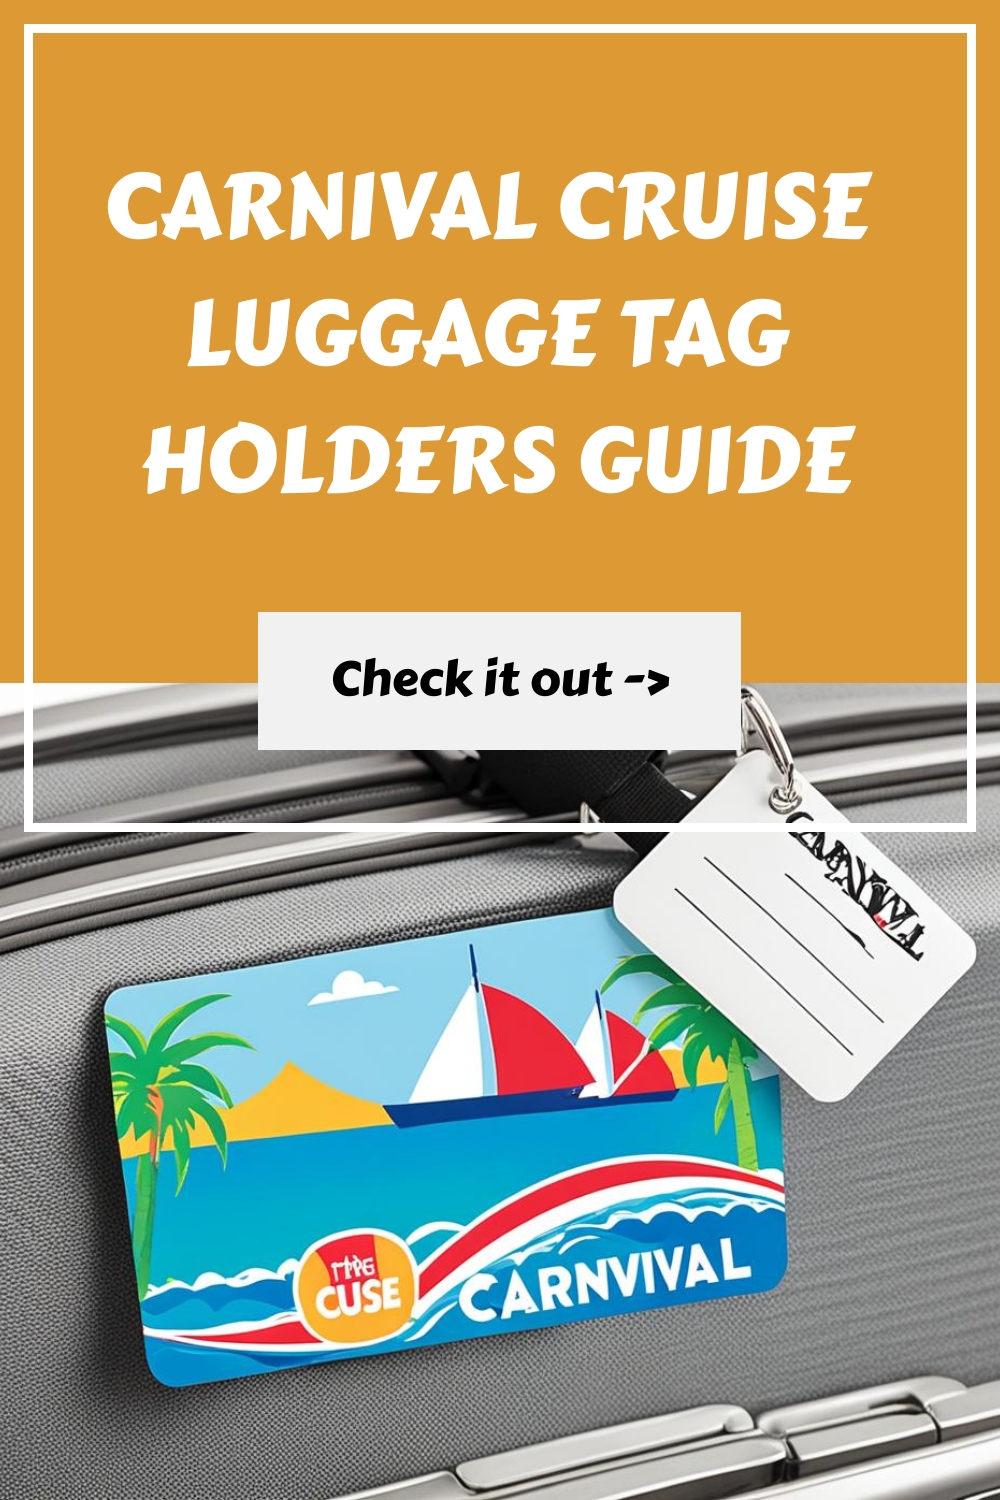 Carnival Cruise Luggage Tag Holders Guide generated pin 160059